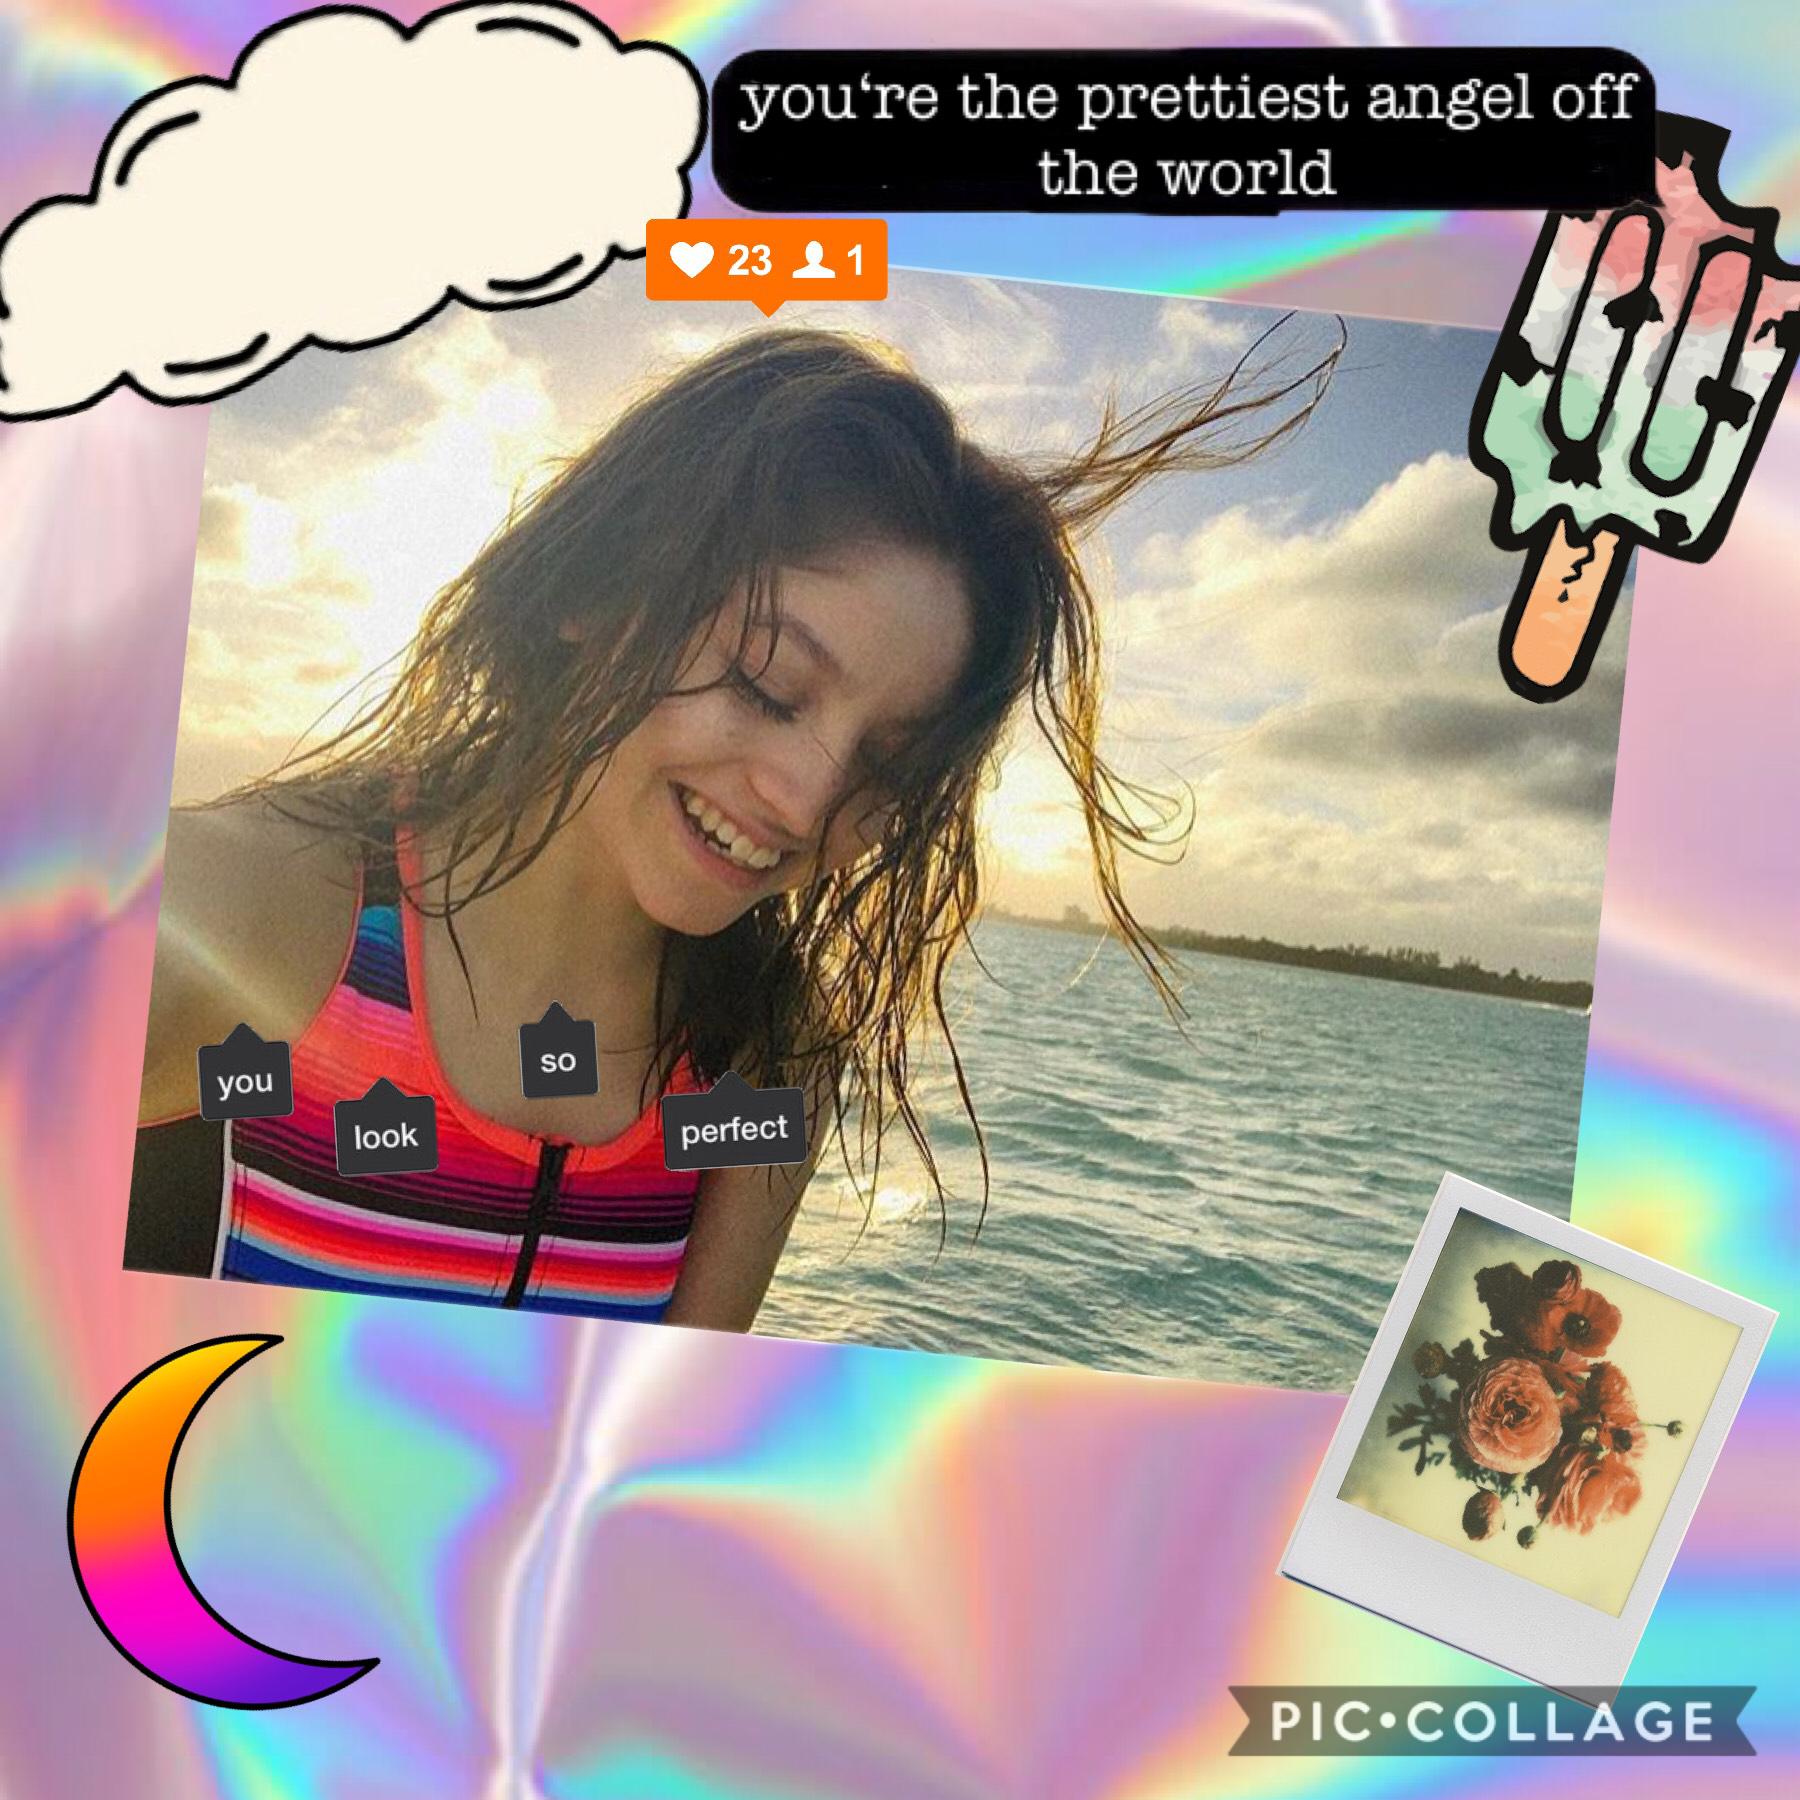 she‘s an angel on earth❤️❤️ please feedback this edit🥰